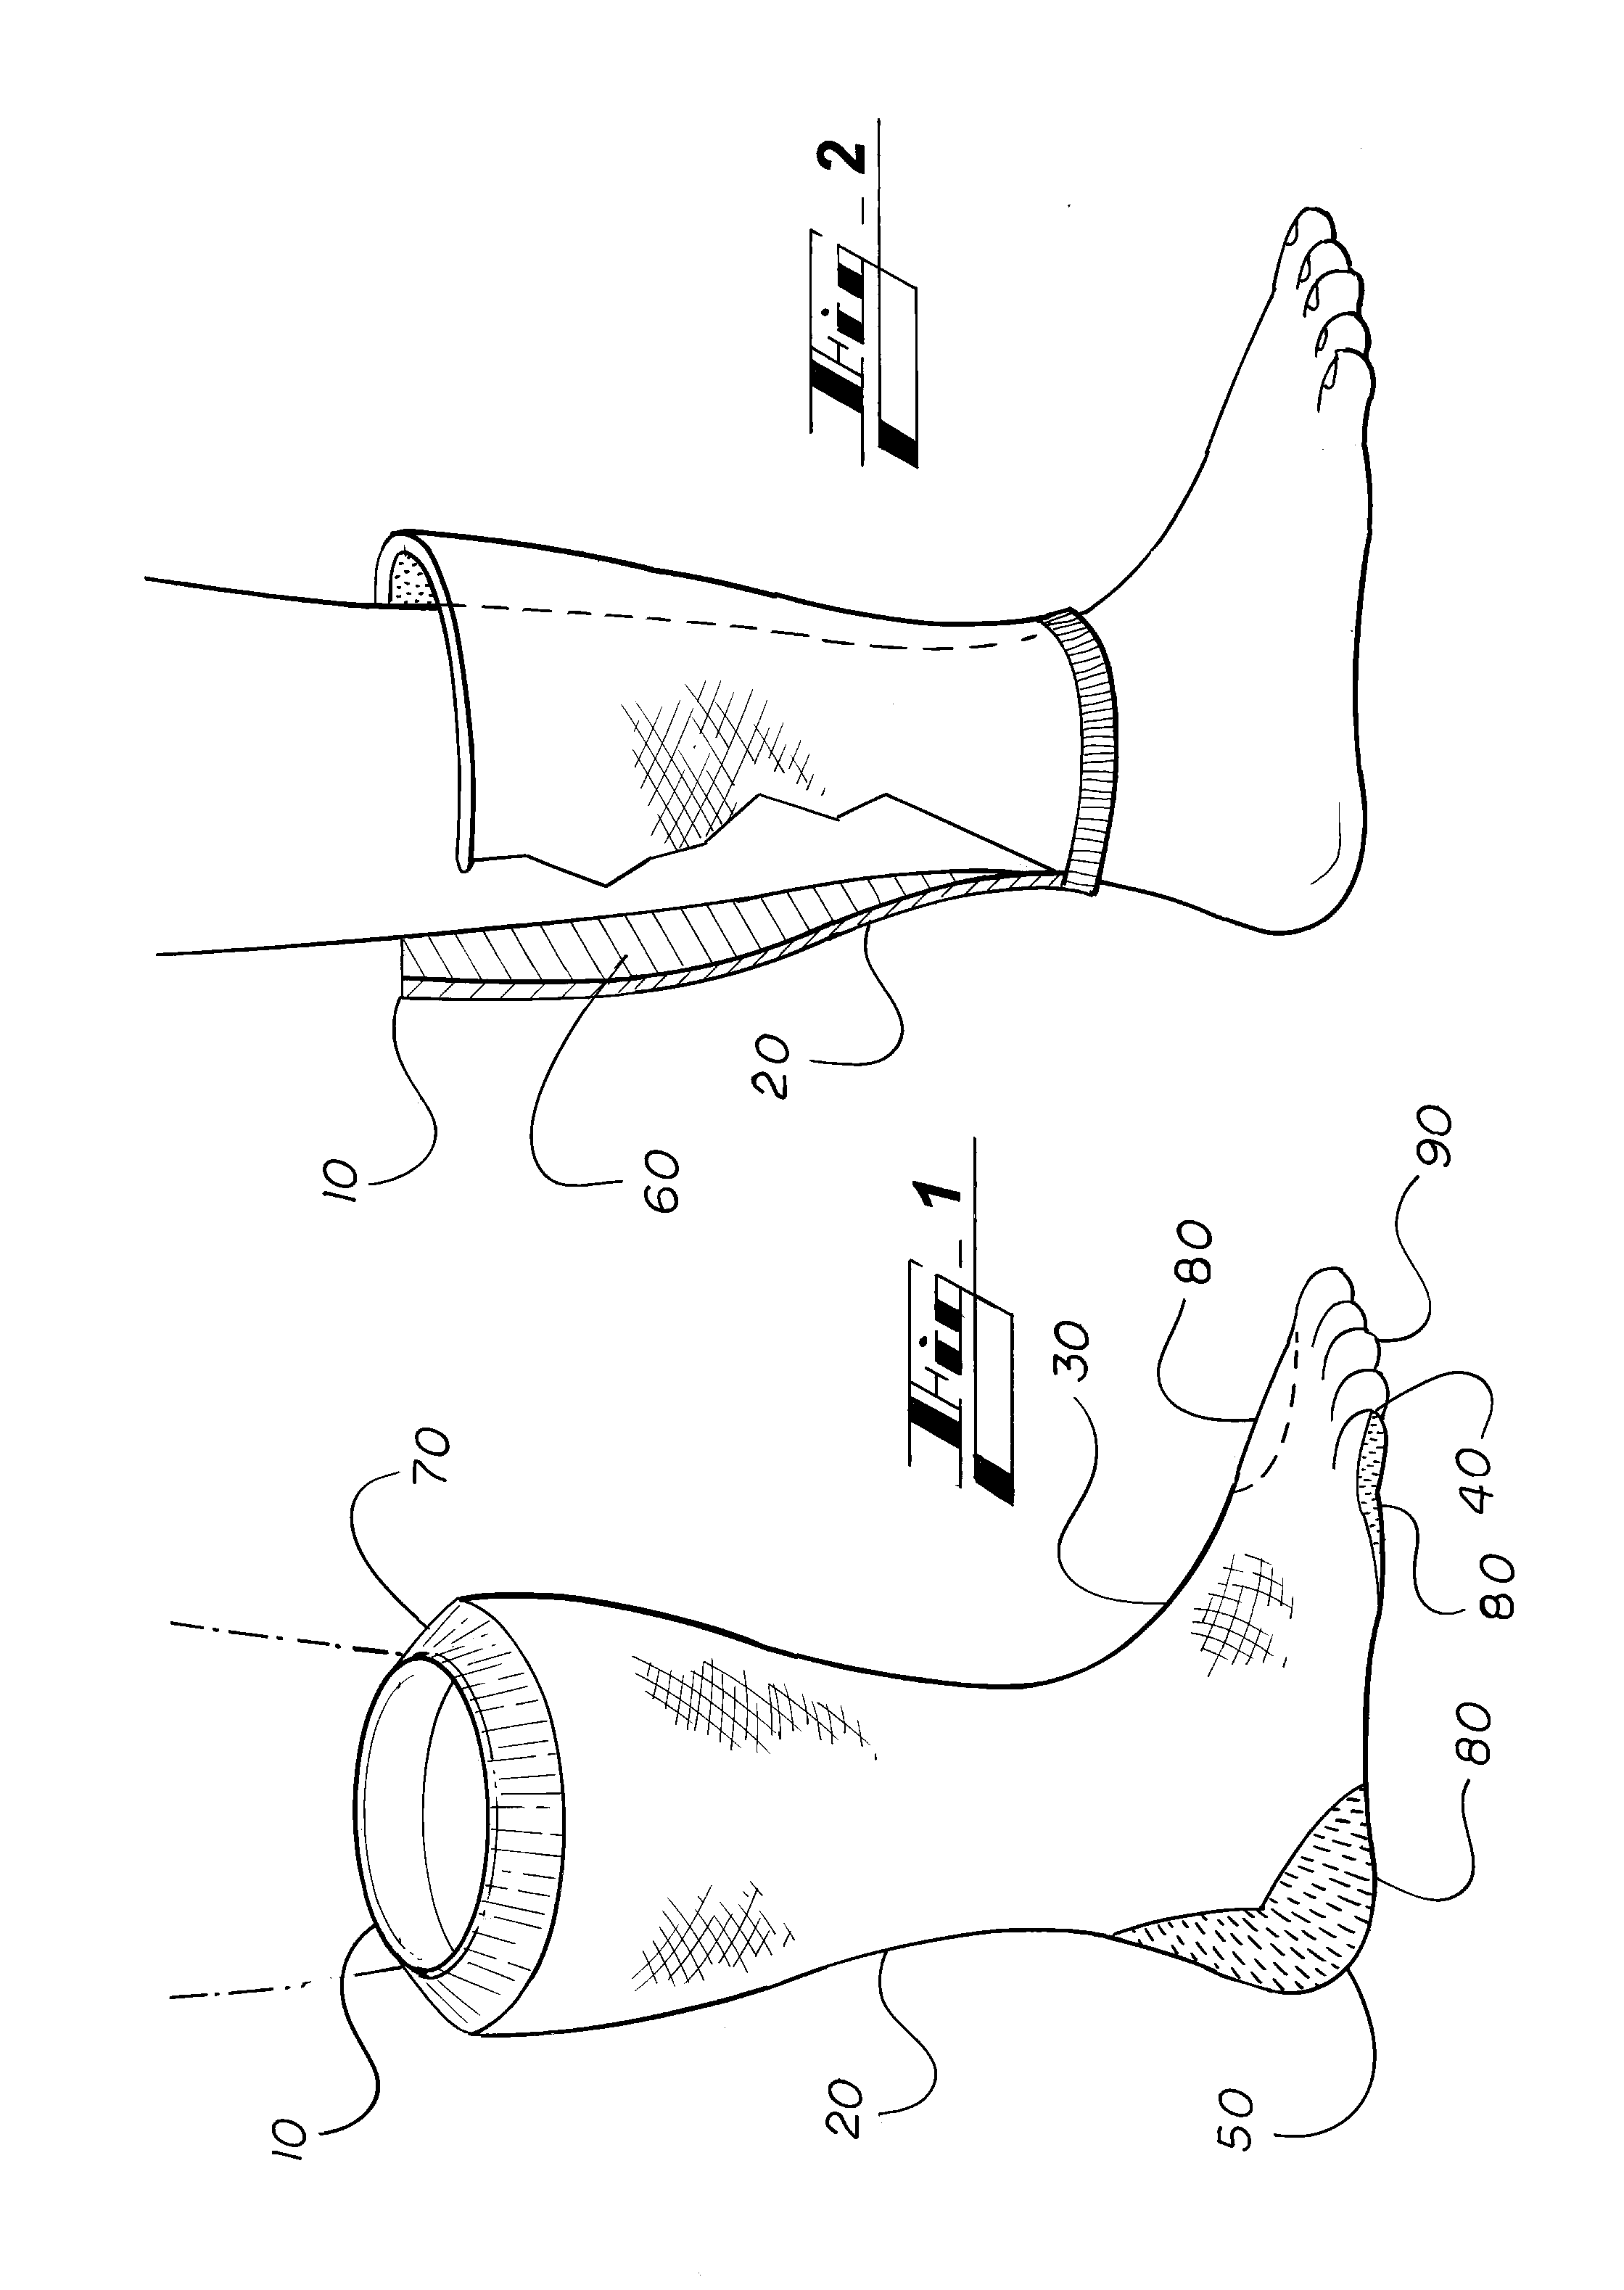 Space filling apparatus for footwear